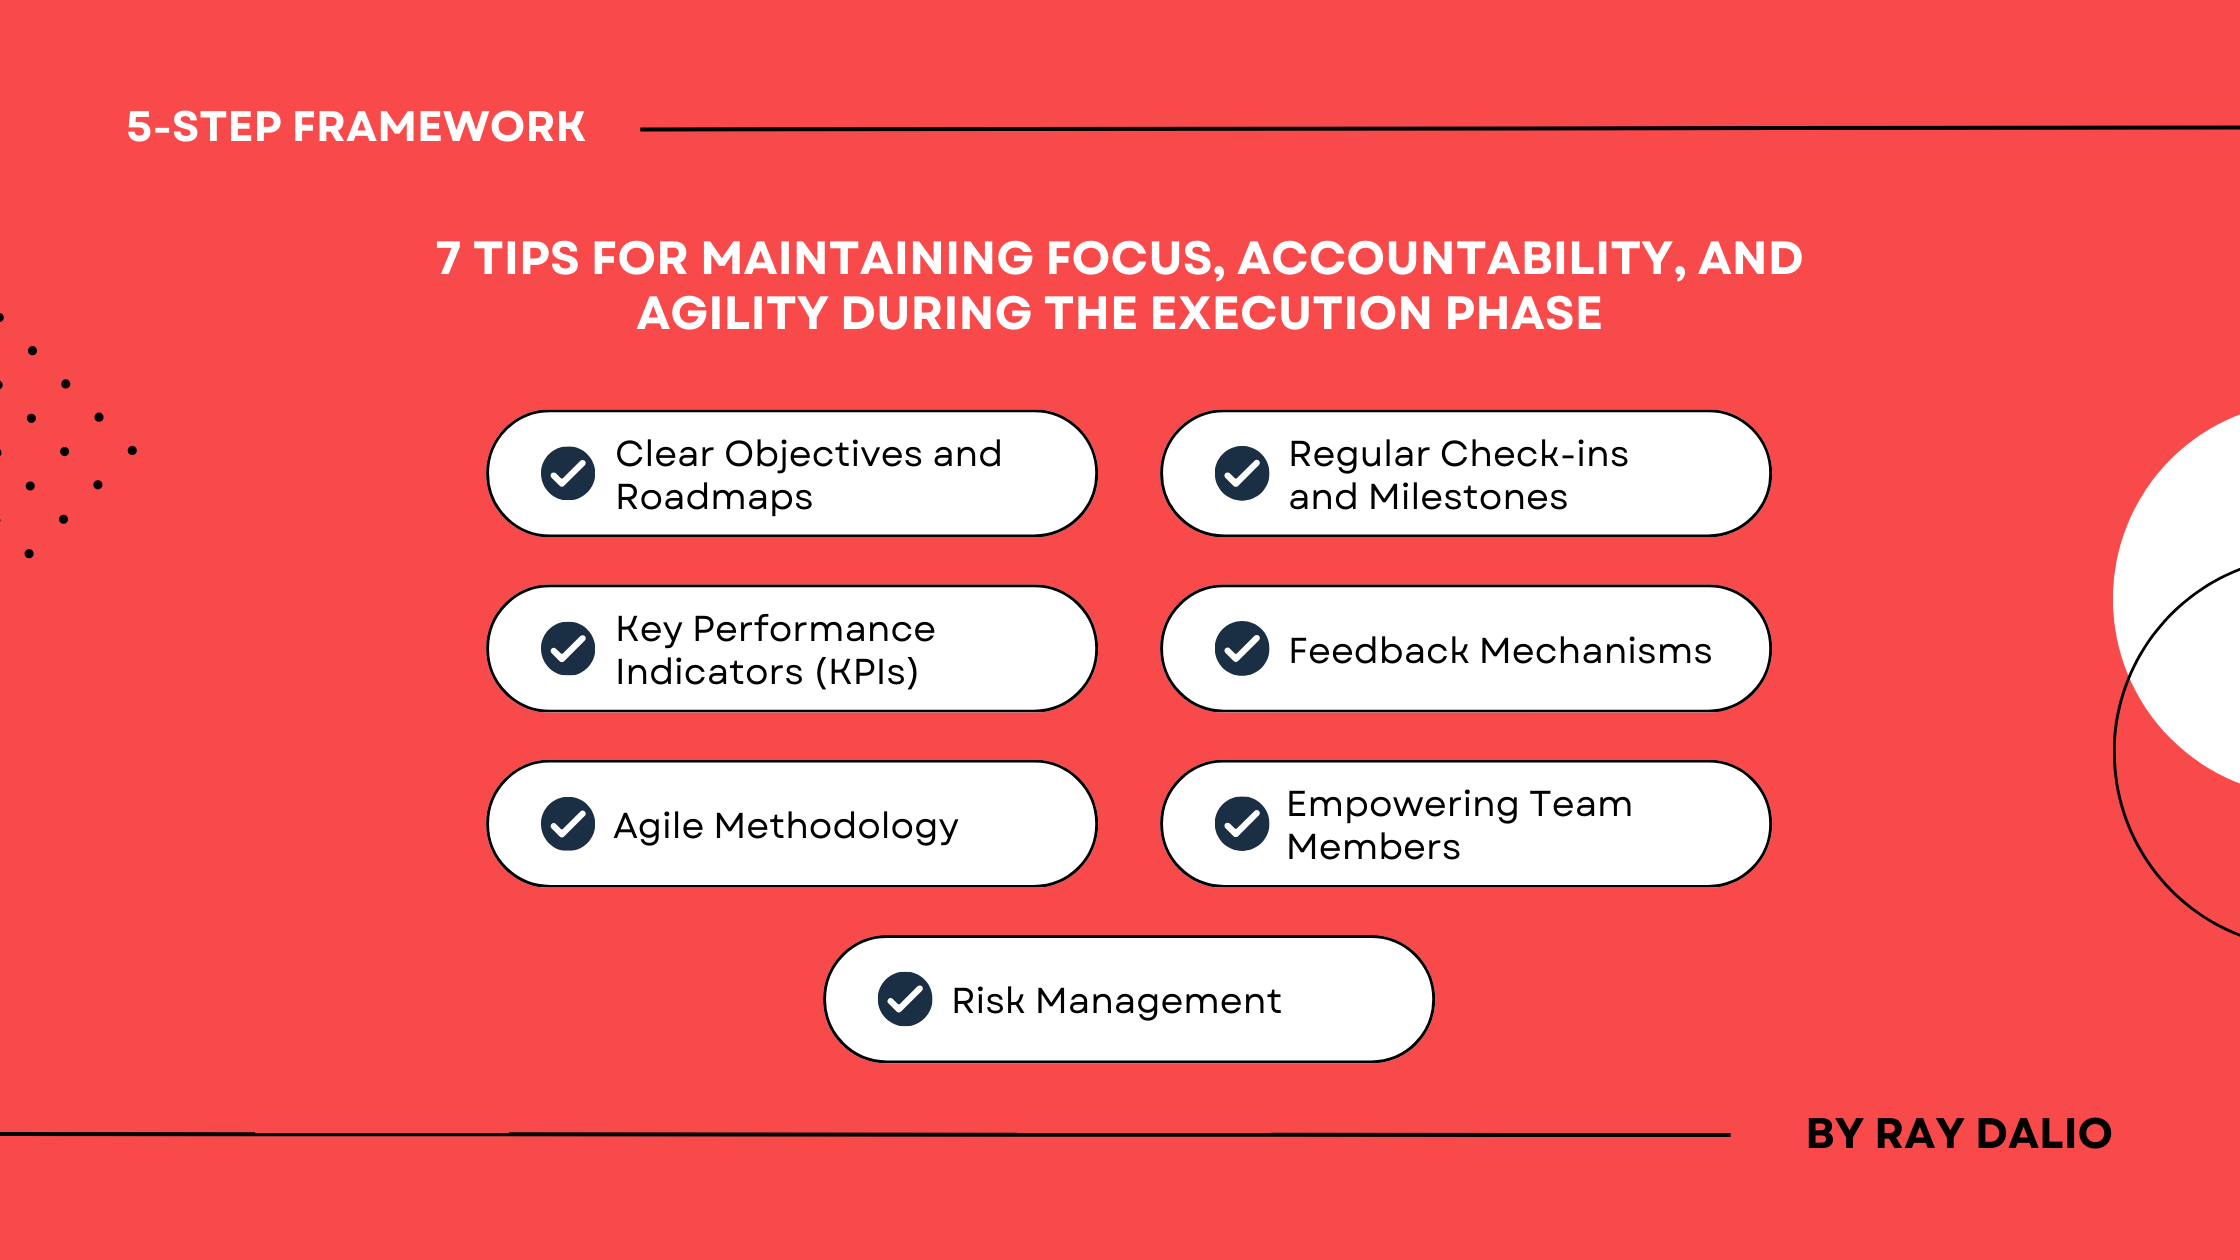 7 Tips for Maintaining Focus, Accountability, and Agility During the Execution Phase